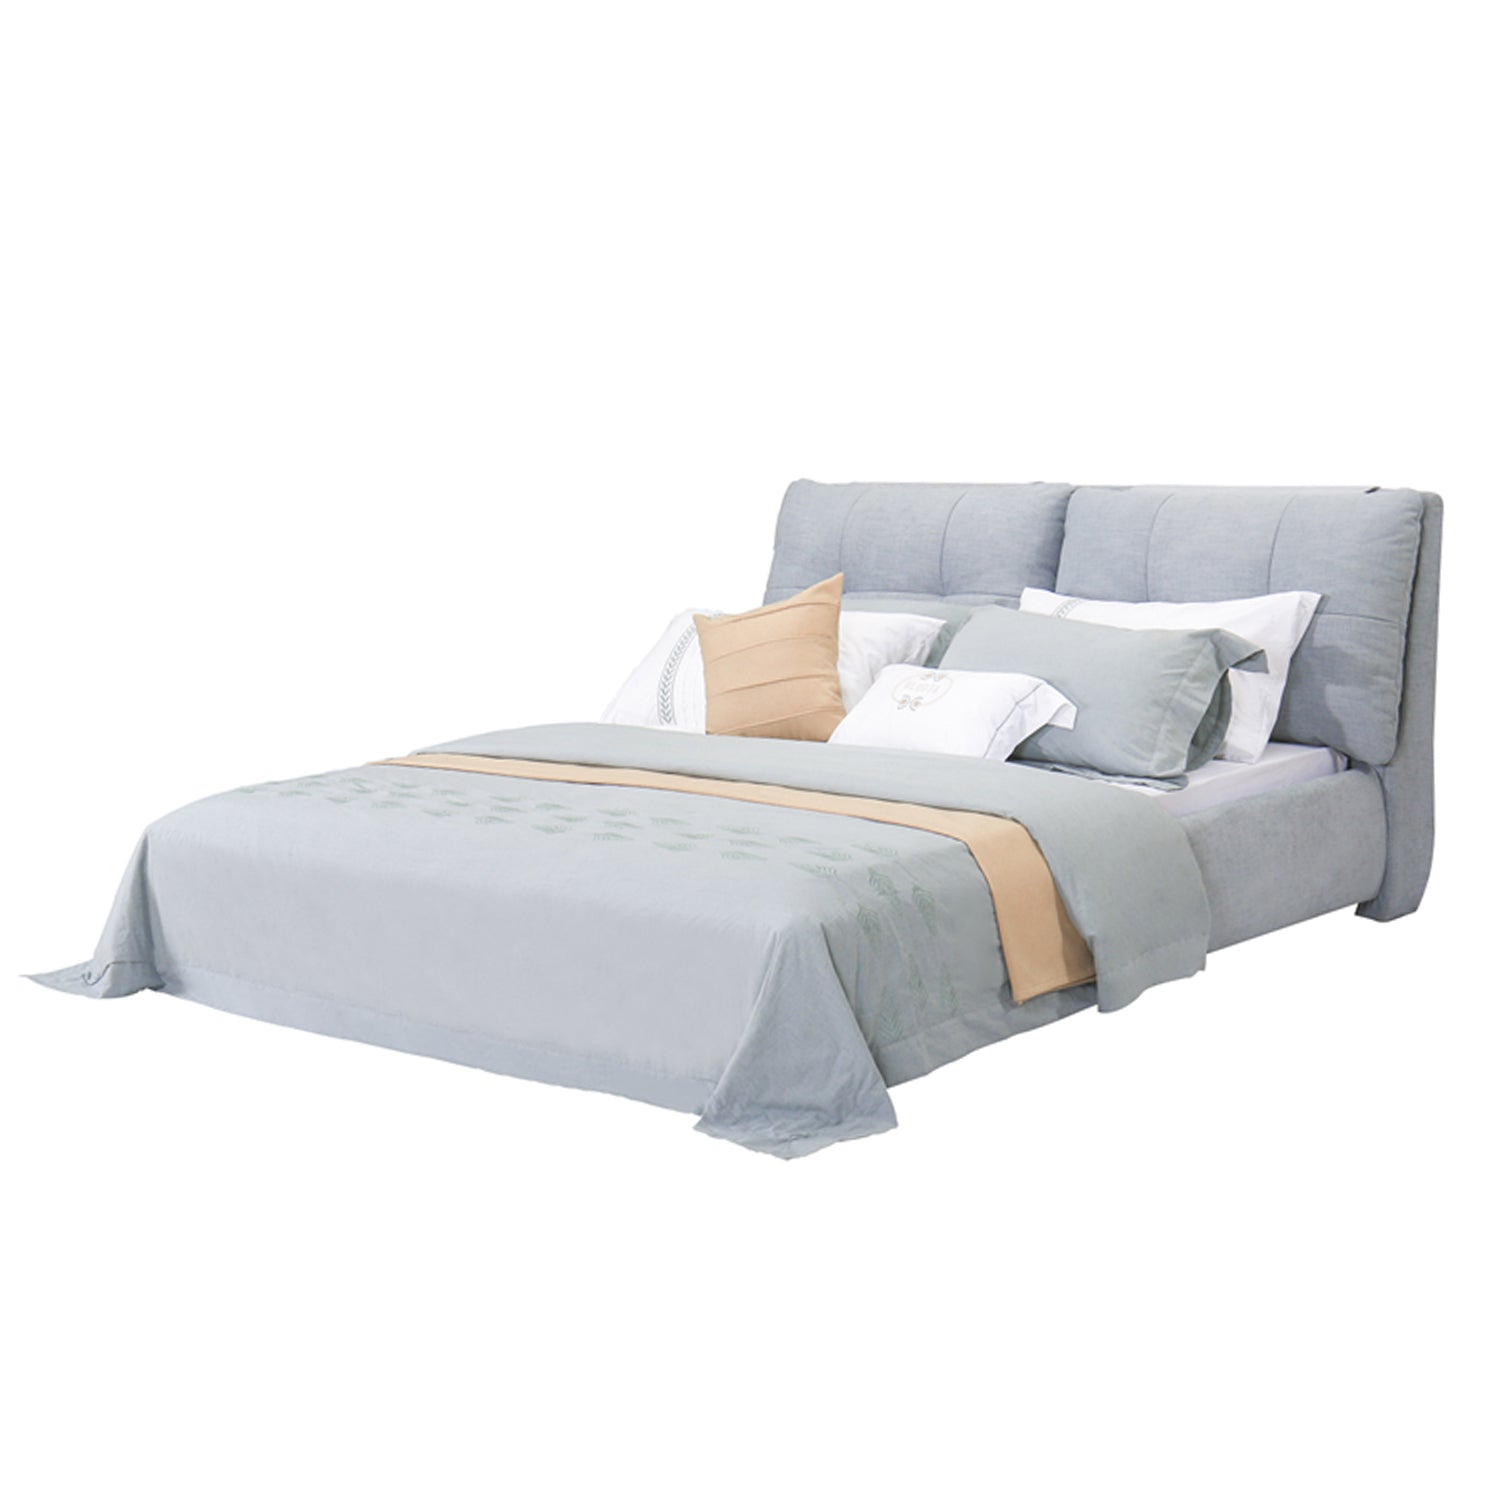 DeRUCCI Bed Frame BZZ4 - 285 in green matcha color, with light gray bed linens, beige throw blanket, and removable, washable double-sided cushion.